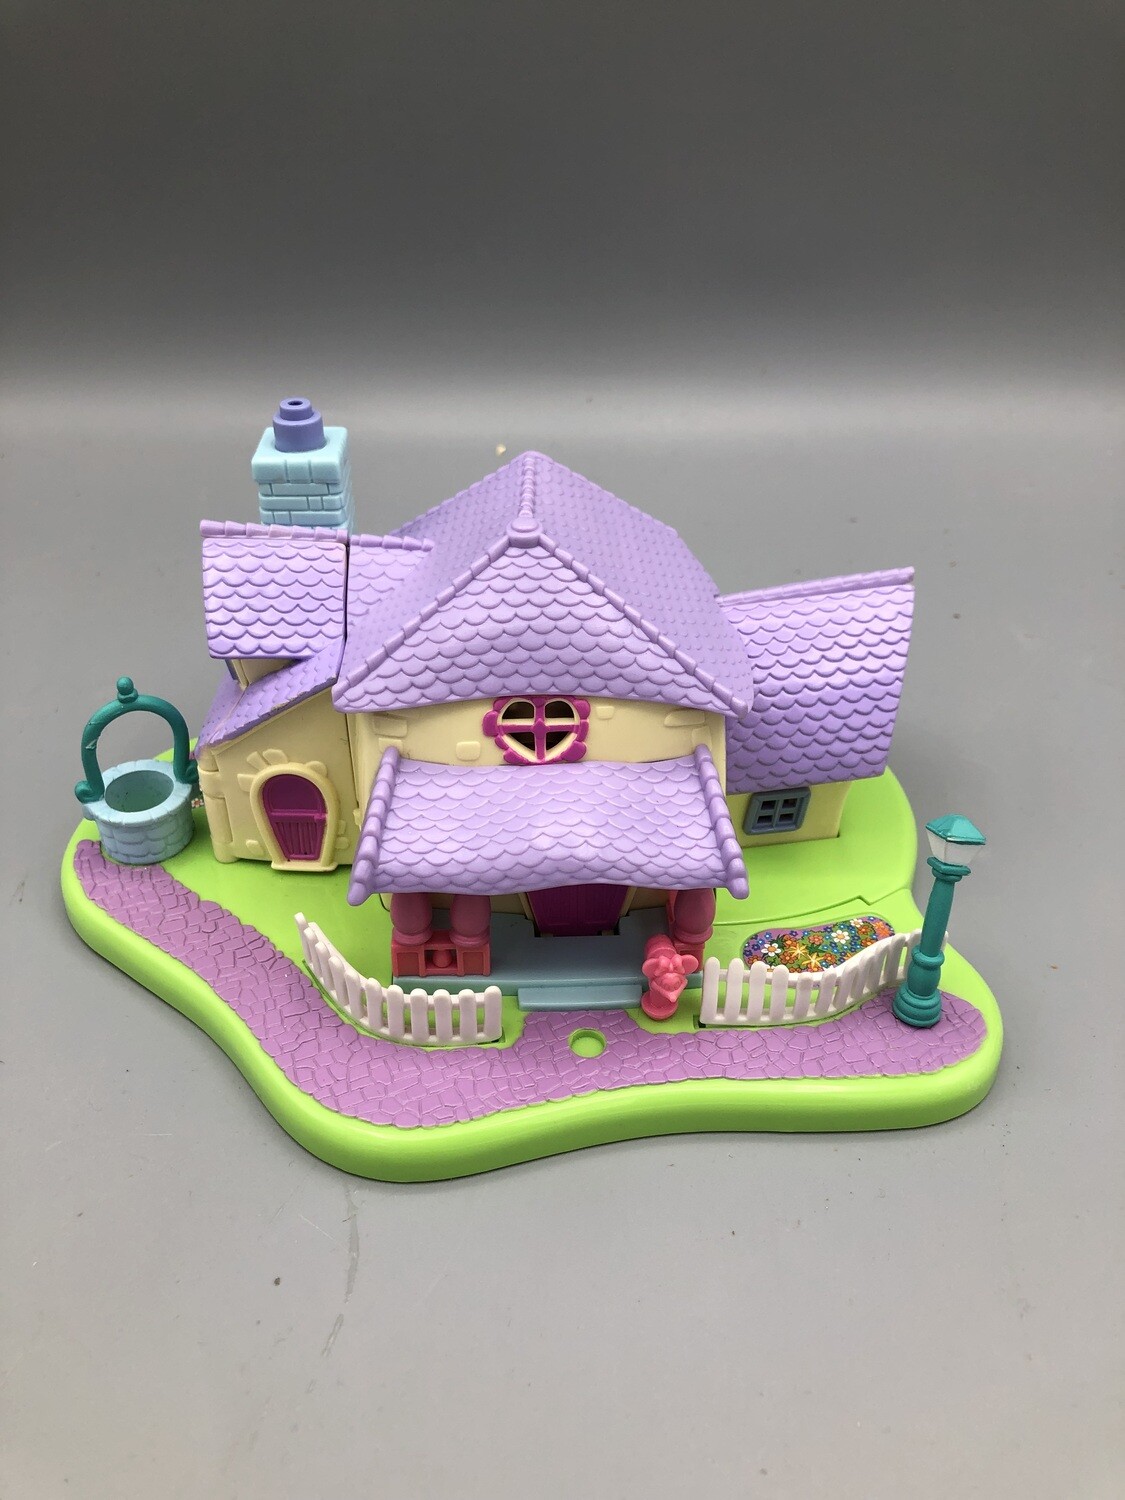 Polly Pocket Bluebird 1995 Minnie's Surprise Party House